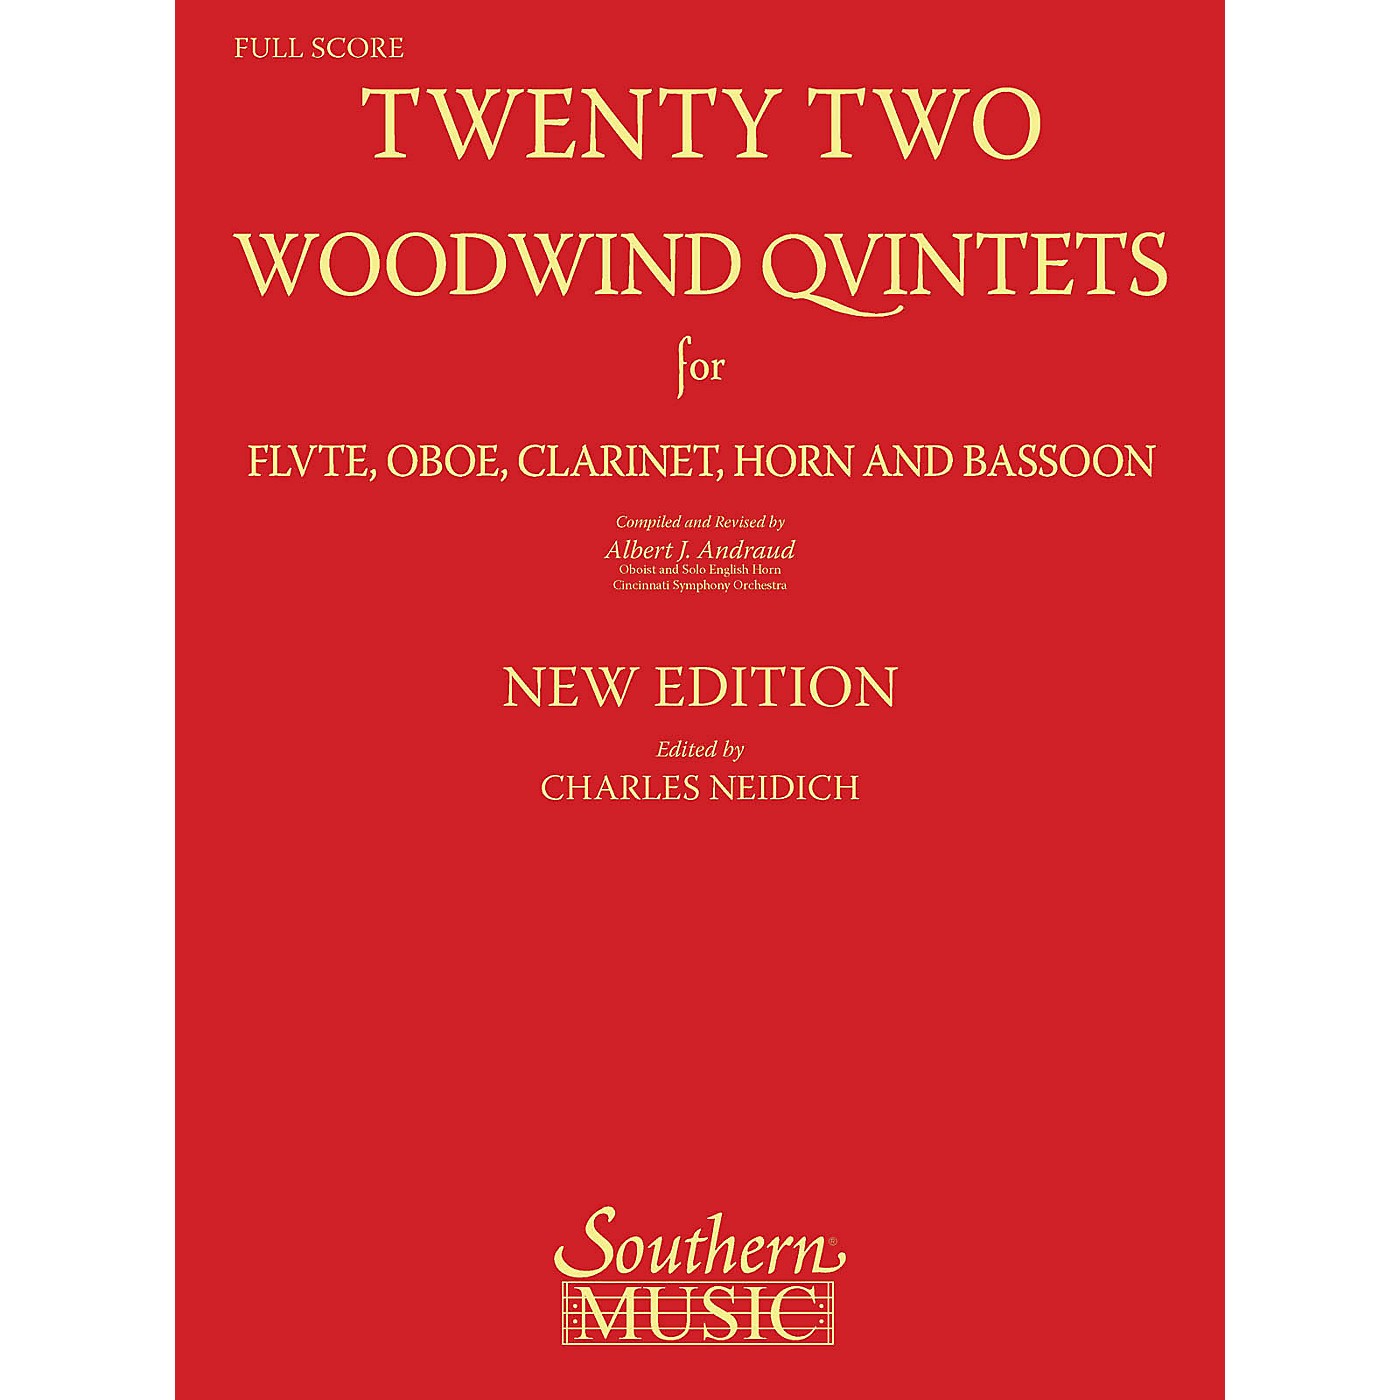 Southern 22 Woodwind Quintets - New Edition (Woodwind Quintet) Southern Music Series Arranged by Albert Andraud thumbnail